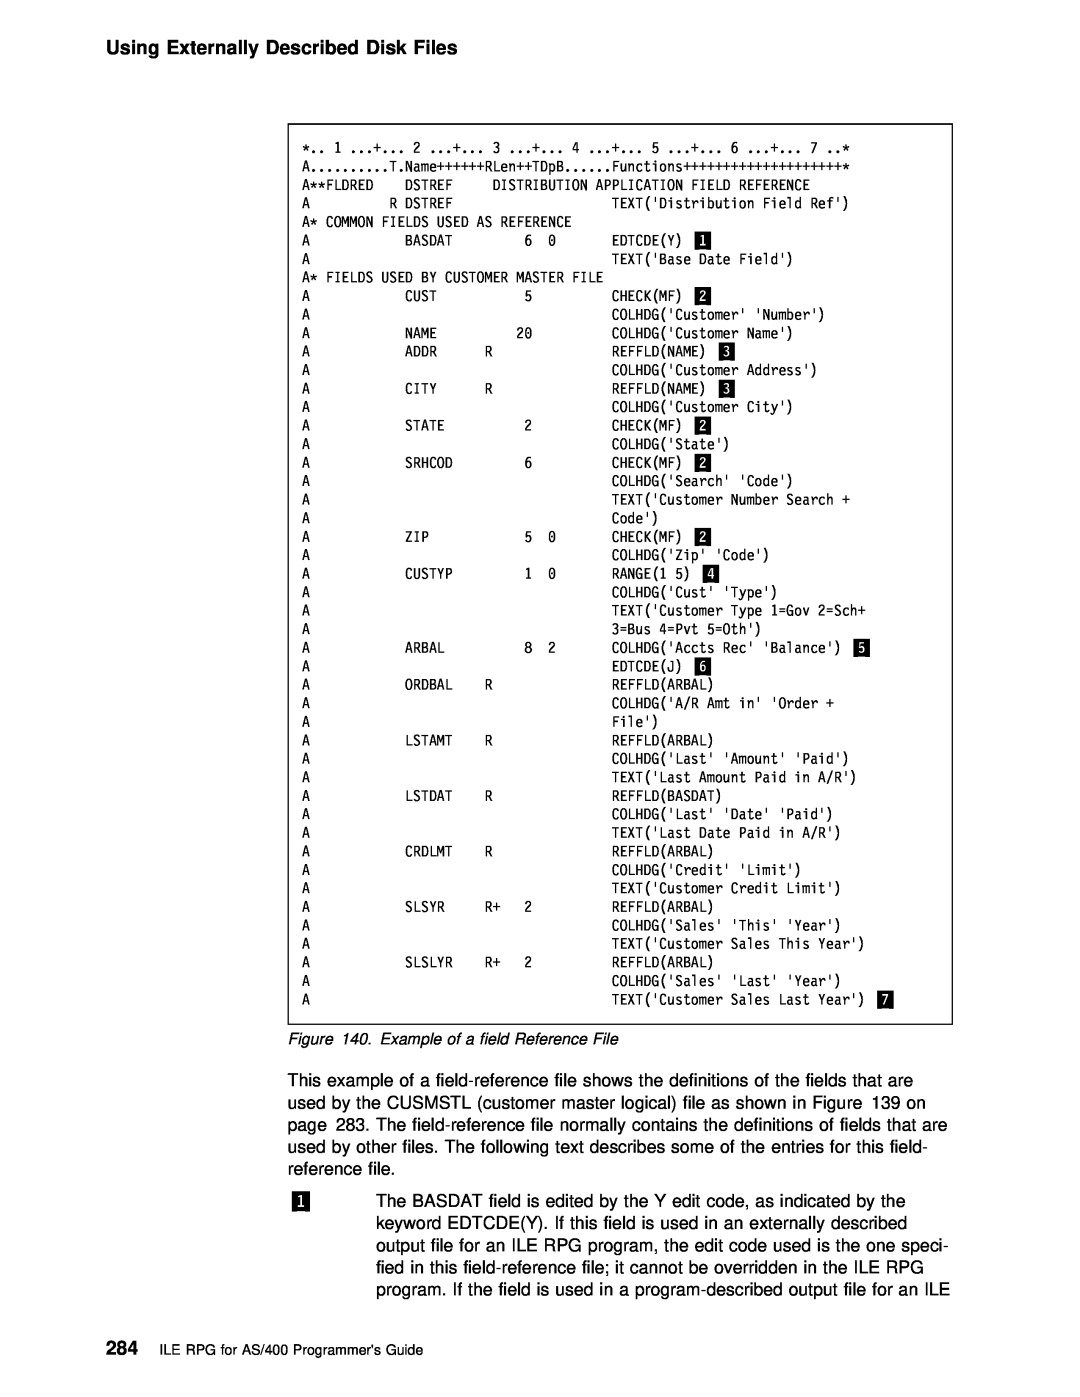 IBM Using Externally Described Disk Files, Example of a field Reference File, ILE RPG for AS/400 Programmers Guide 